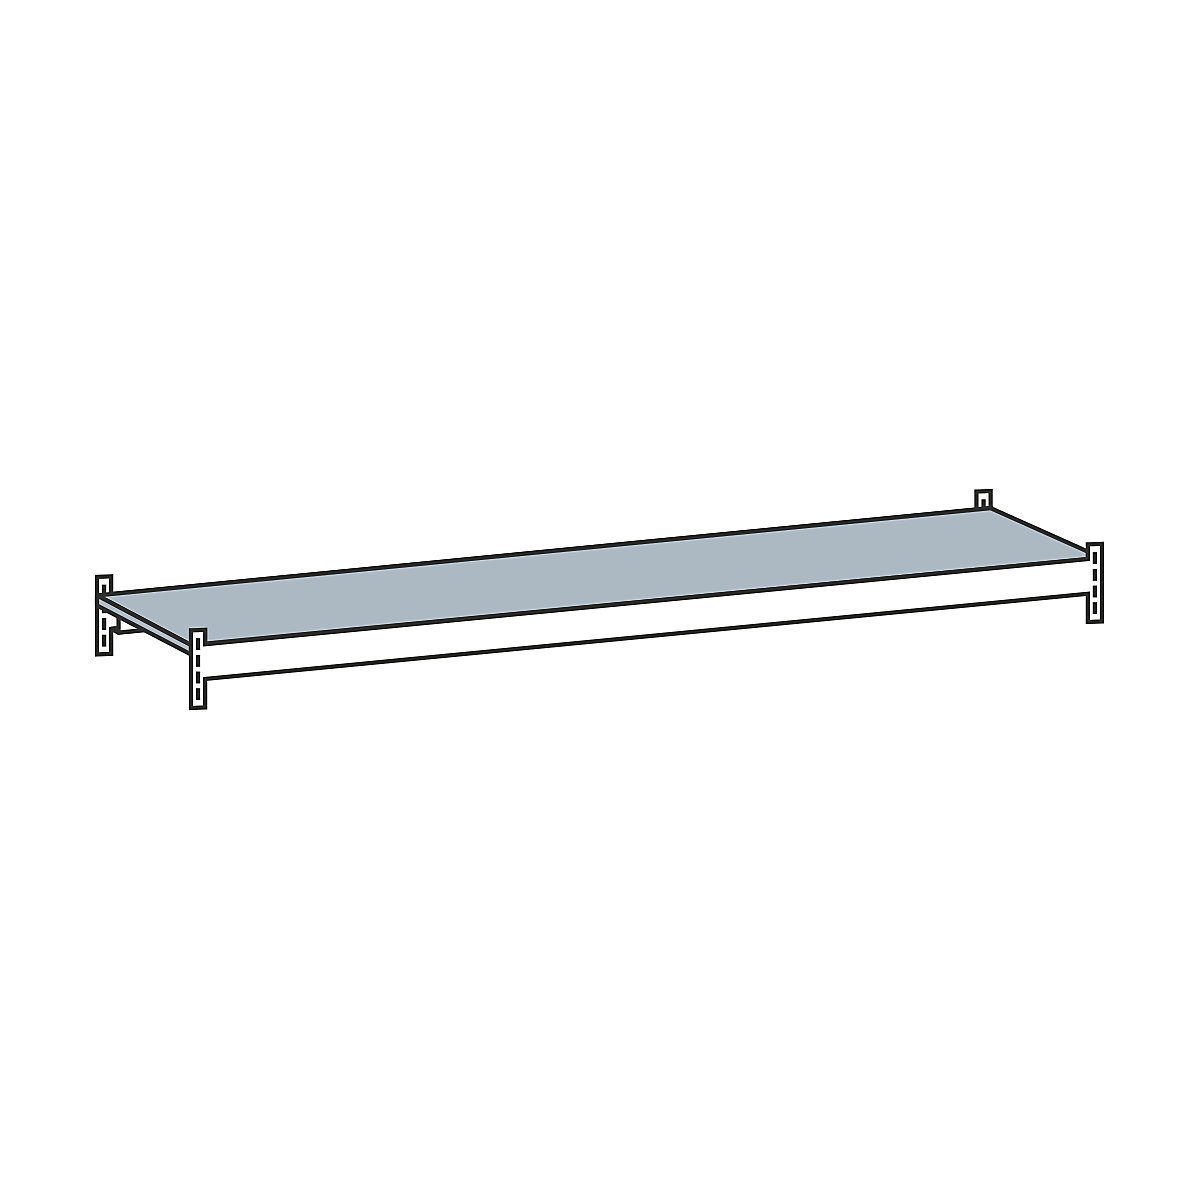 Additional level with steel shelf – SCHULTE